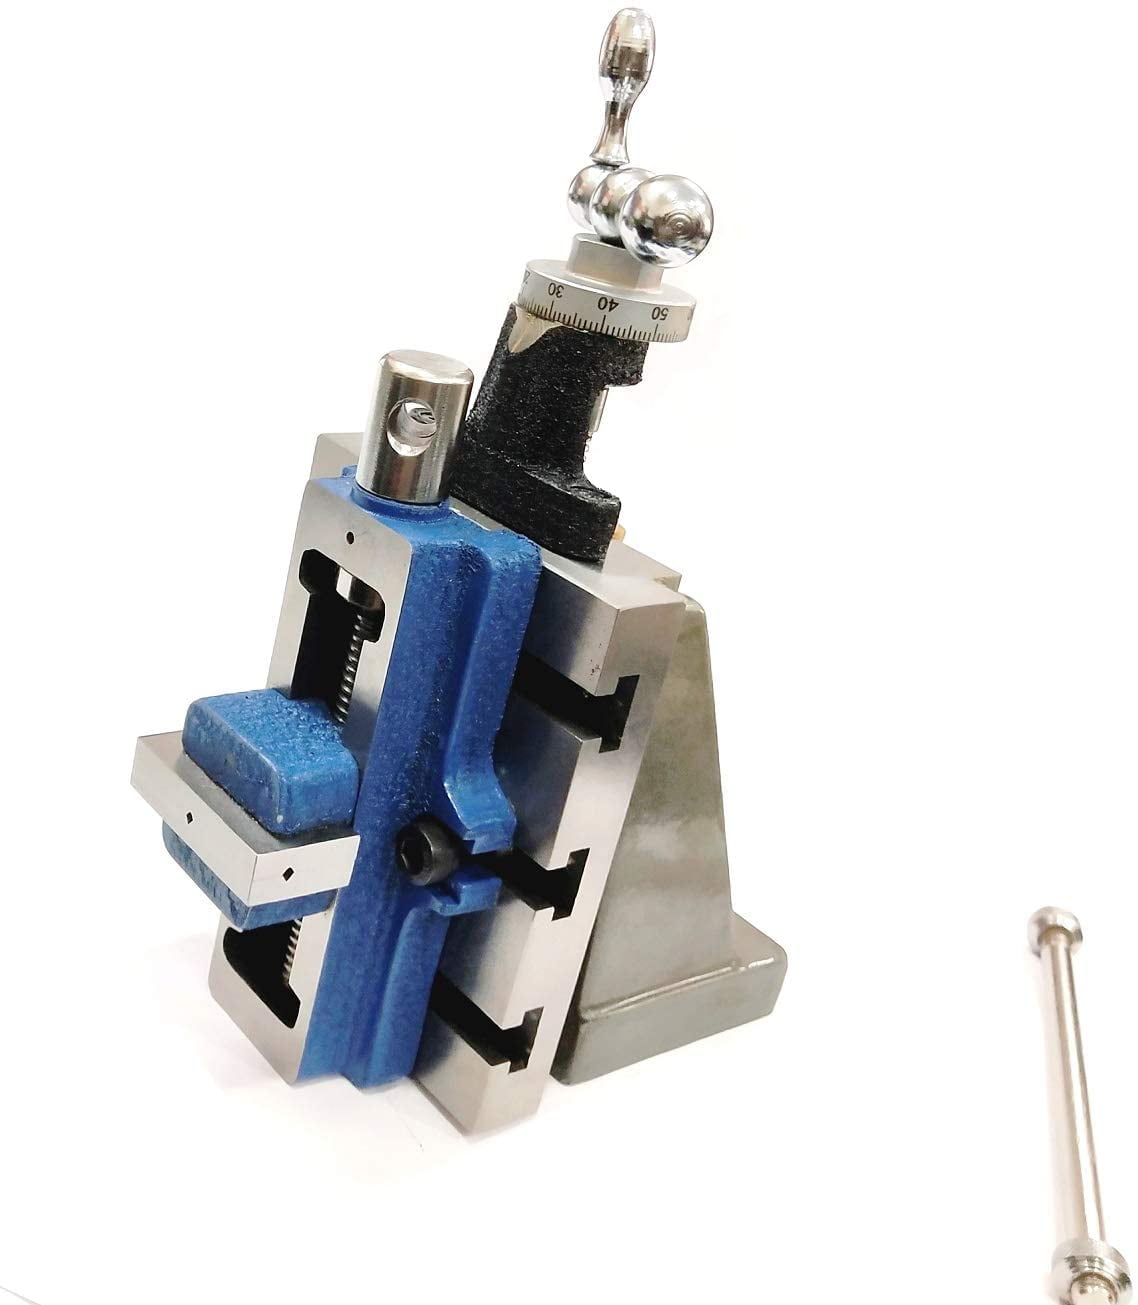 SELF Centering Vice Vise-50 mm 2" Jaws Width 50 mm Premium Quality 